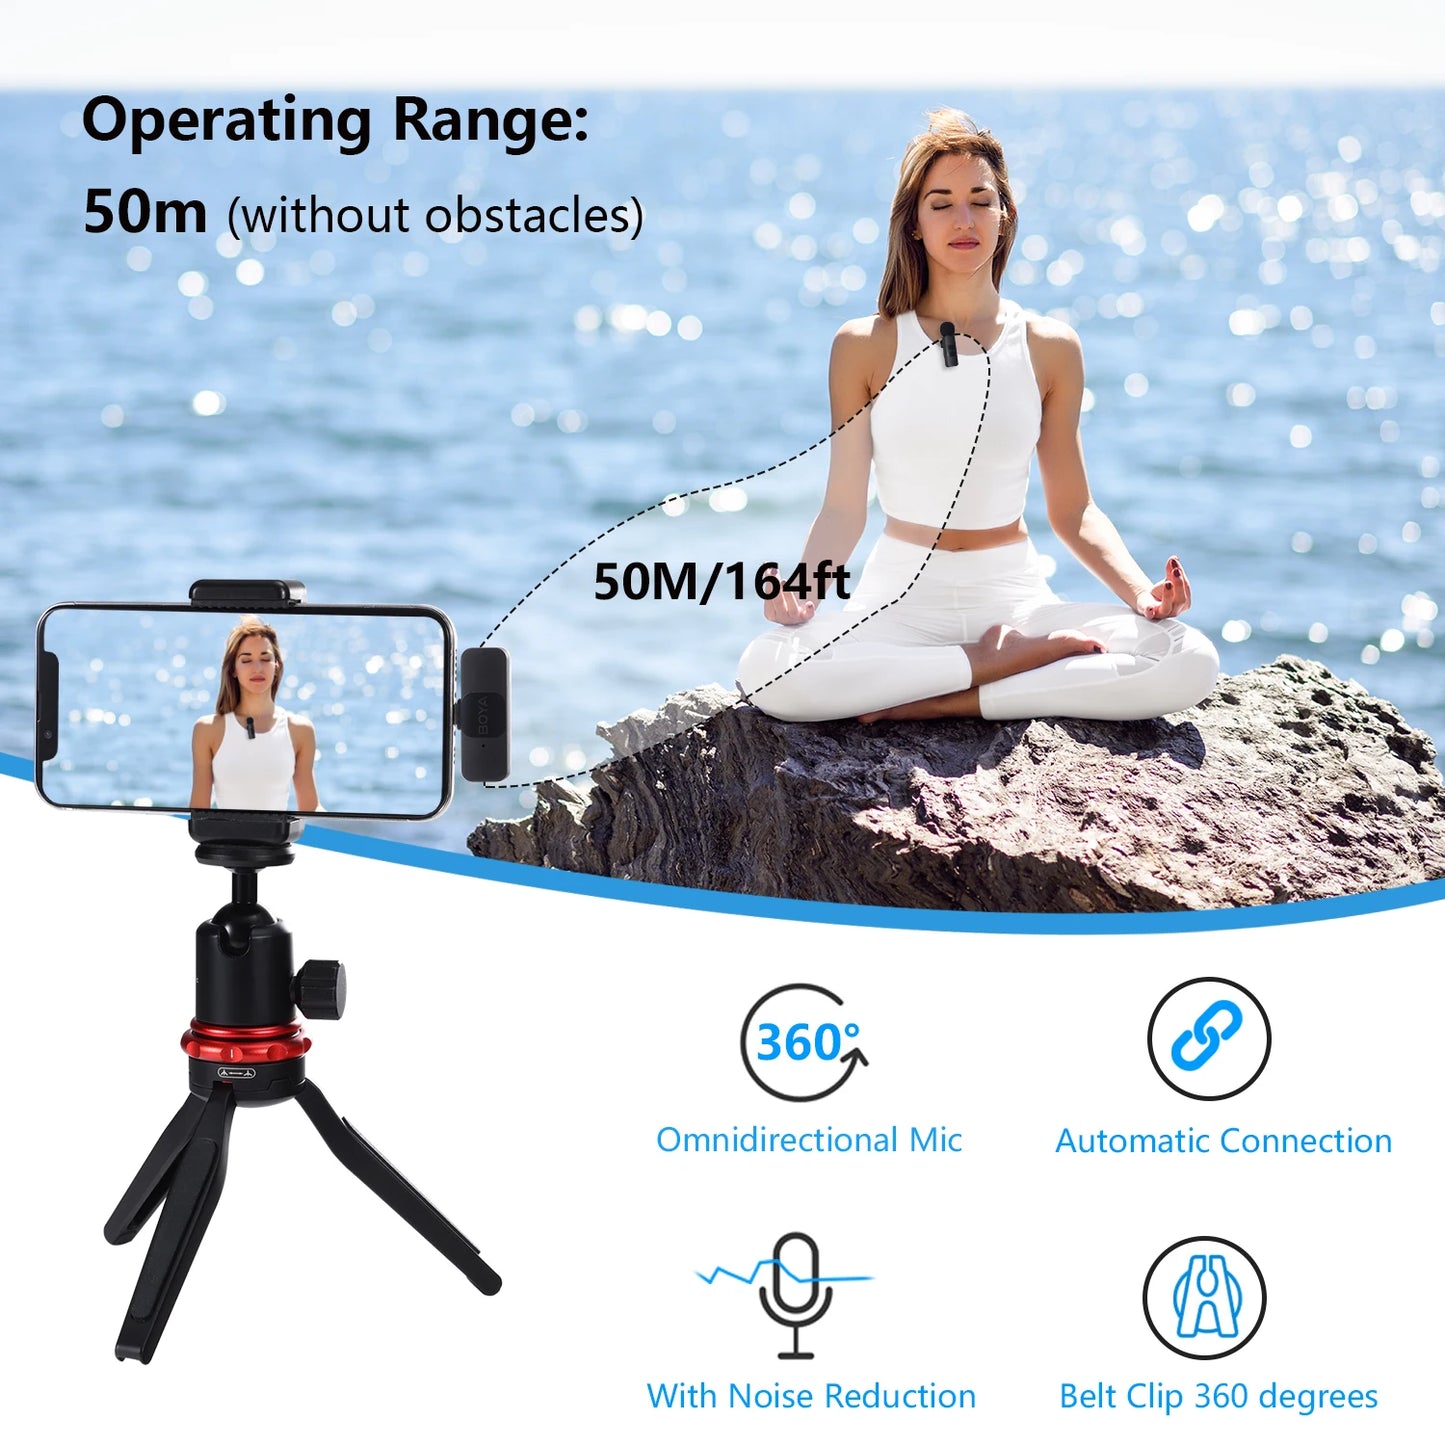 BOYA BY-V Professional Wireless Lavalier Mini Microphone for iPhone iPad Android Live Broadcast Gaming Recording Interview Vlog